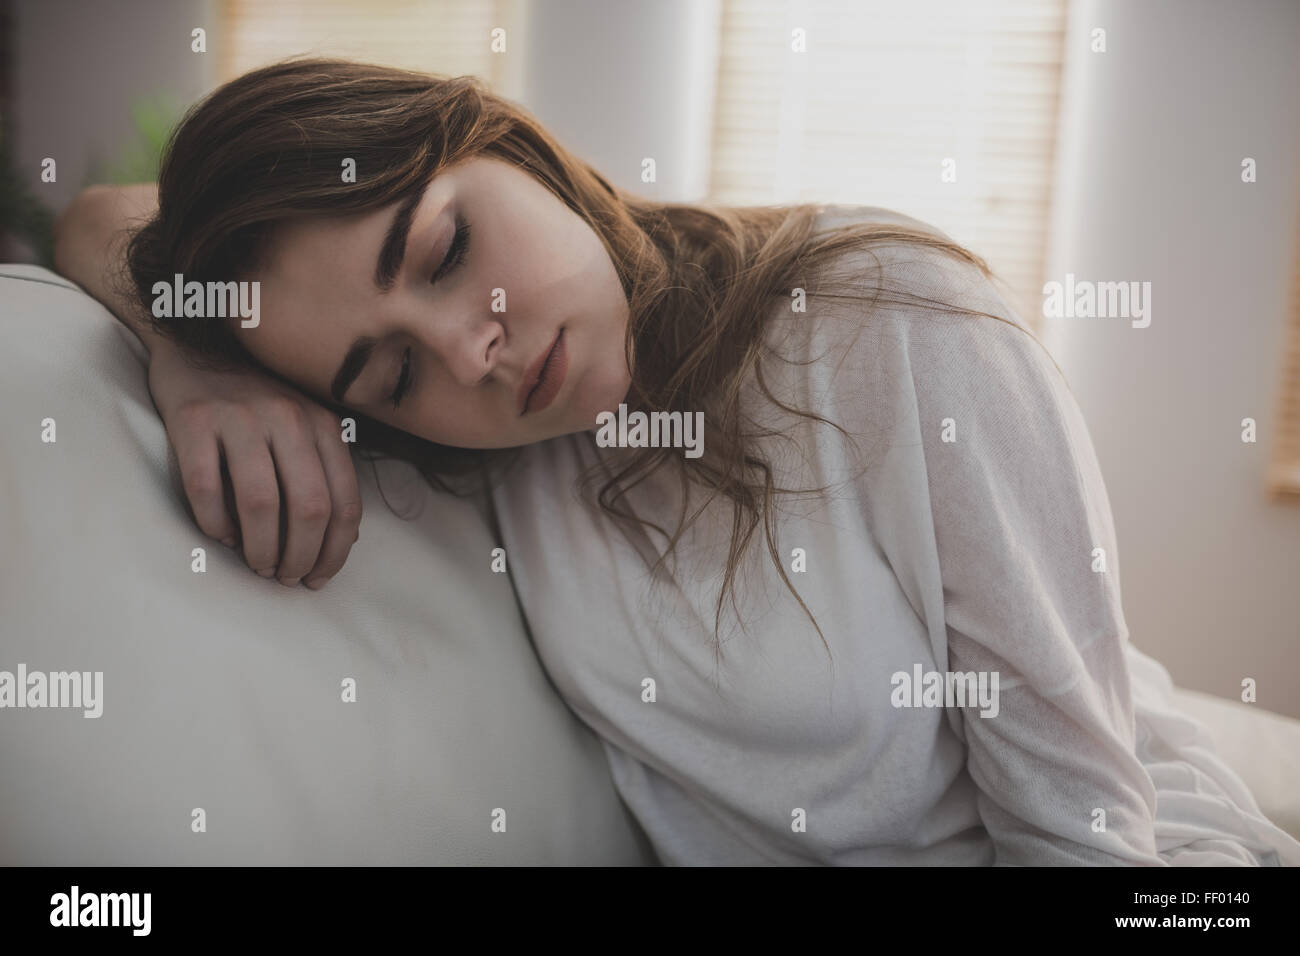 Tired woman falling asleep on the couch Stock Photo